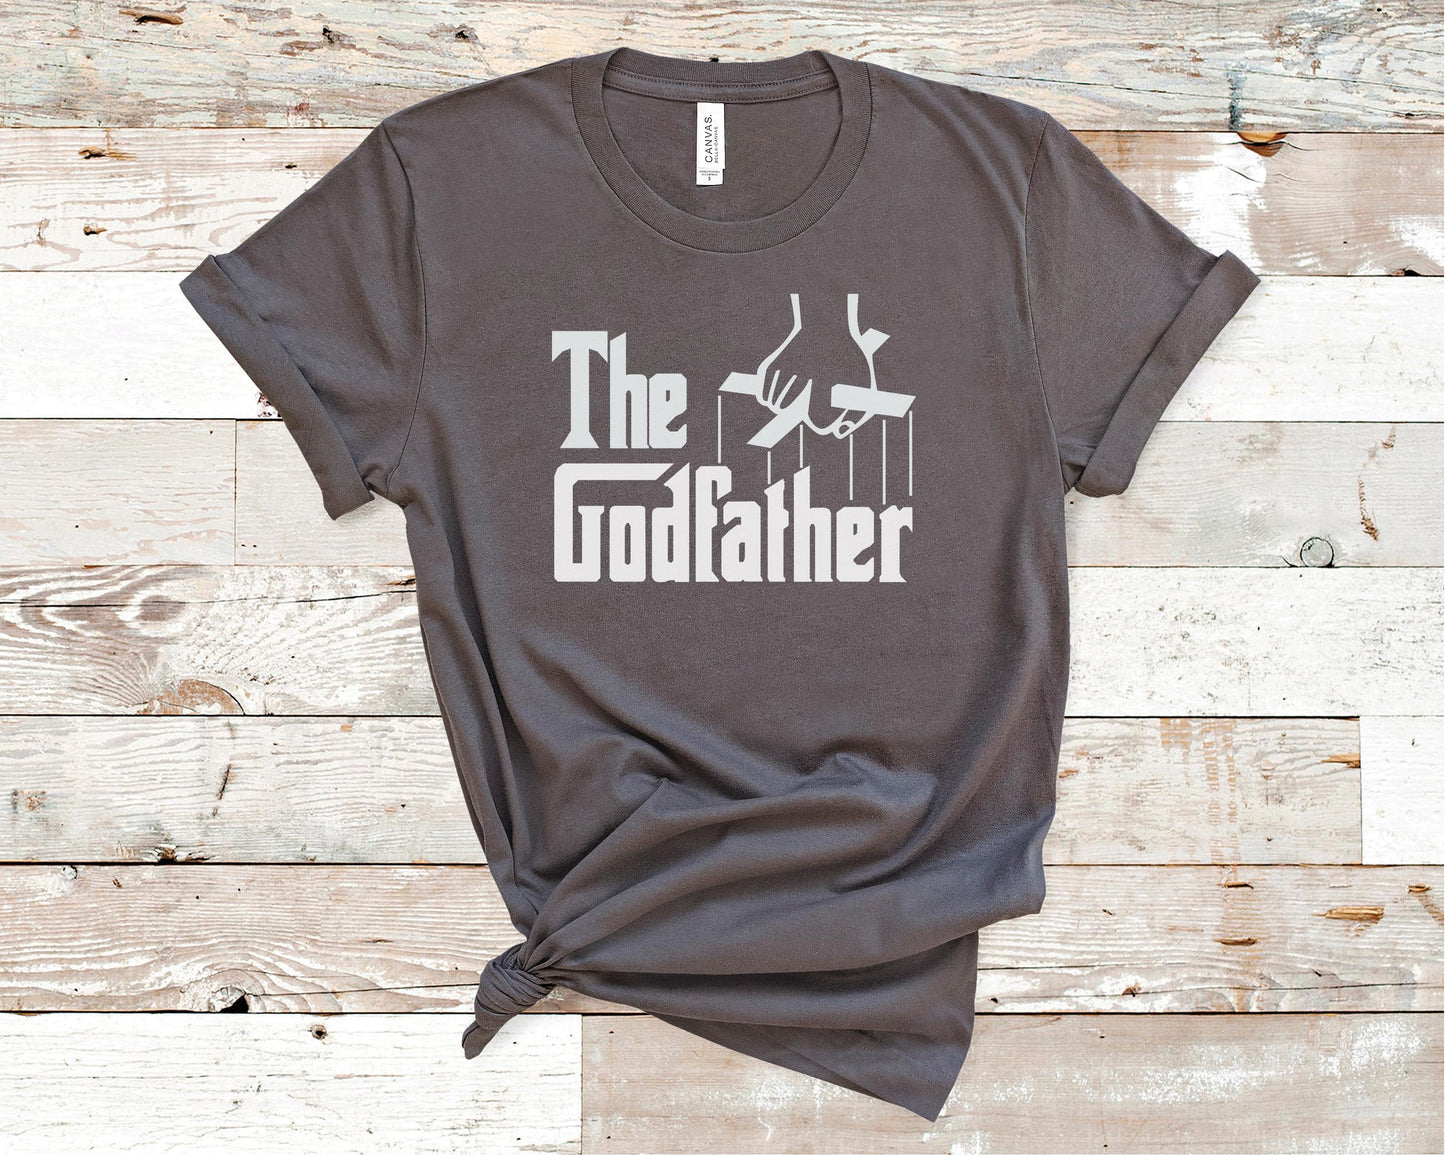 The Godfather - Pregnancy Announcement